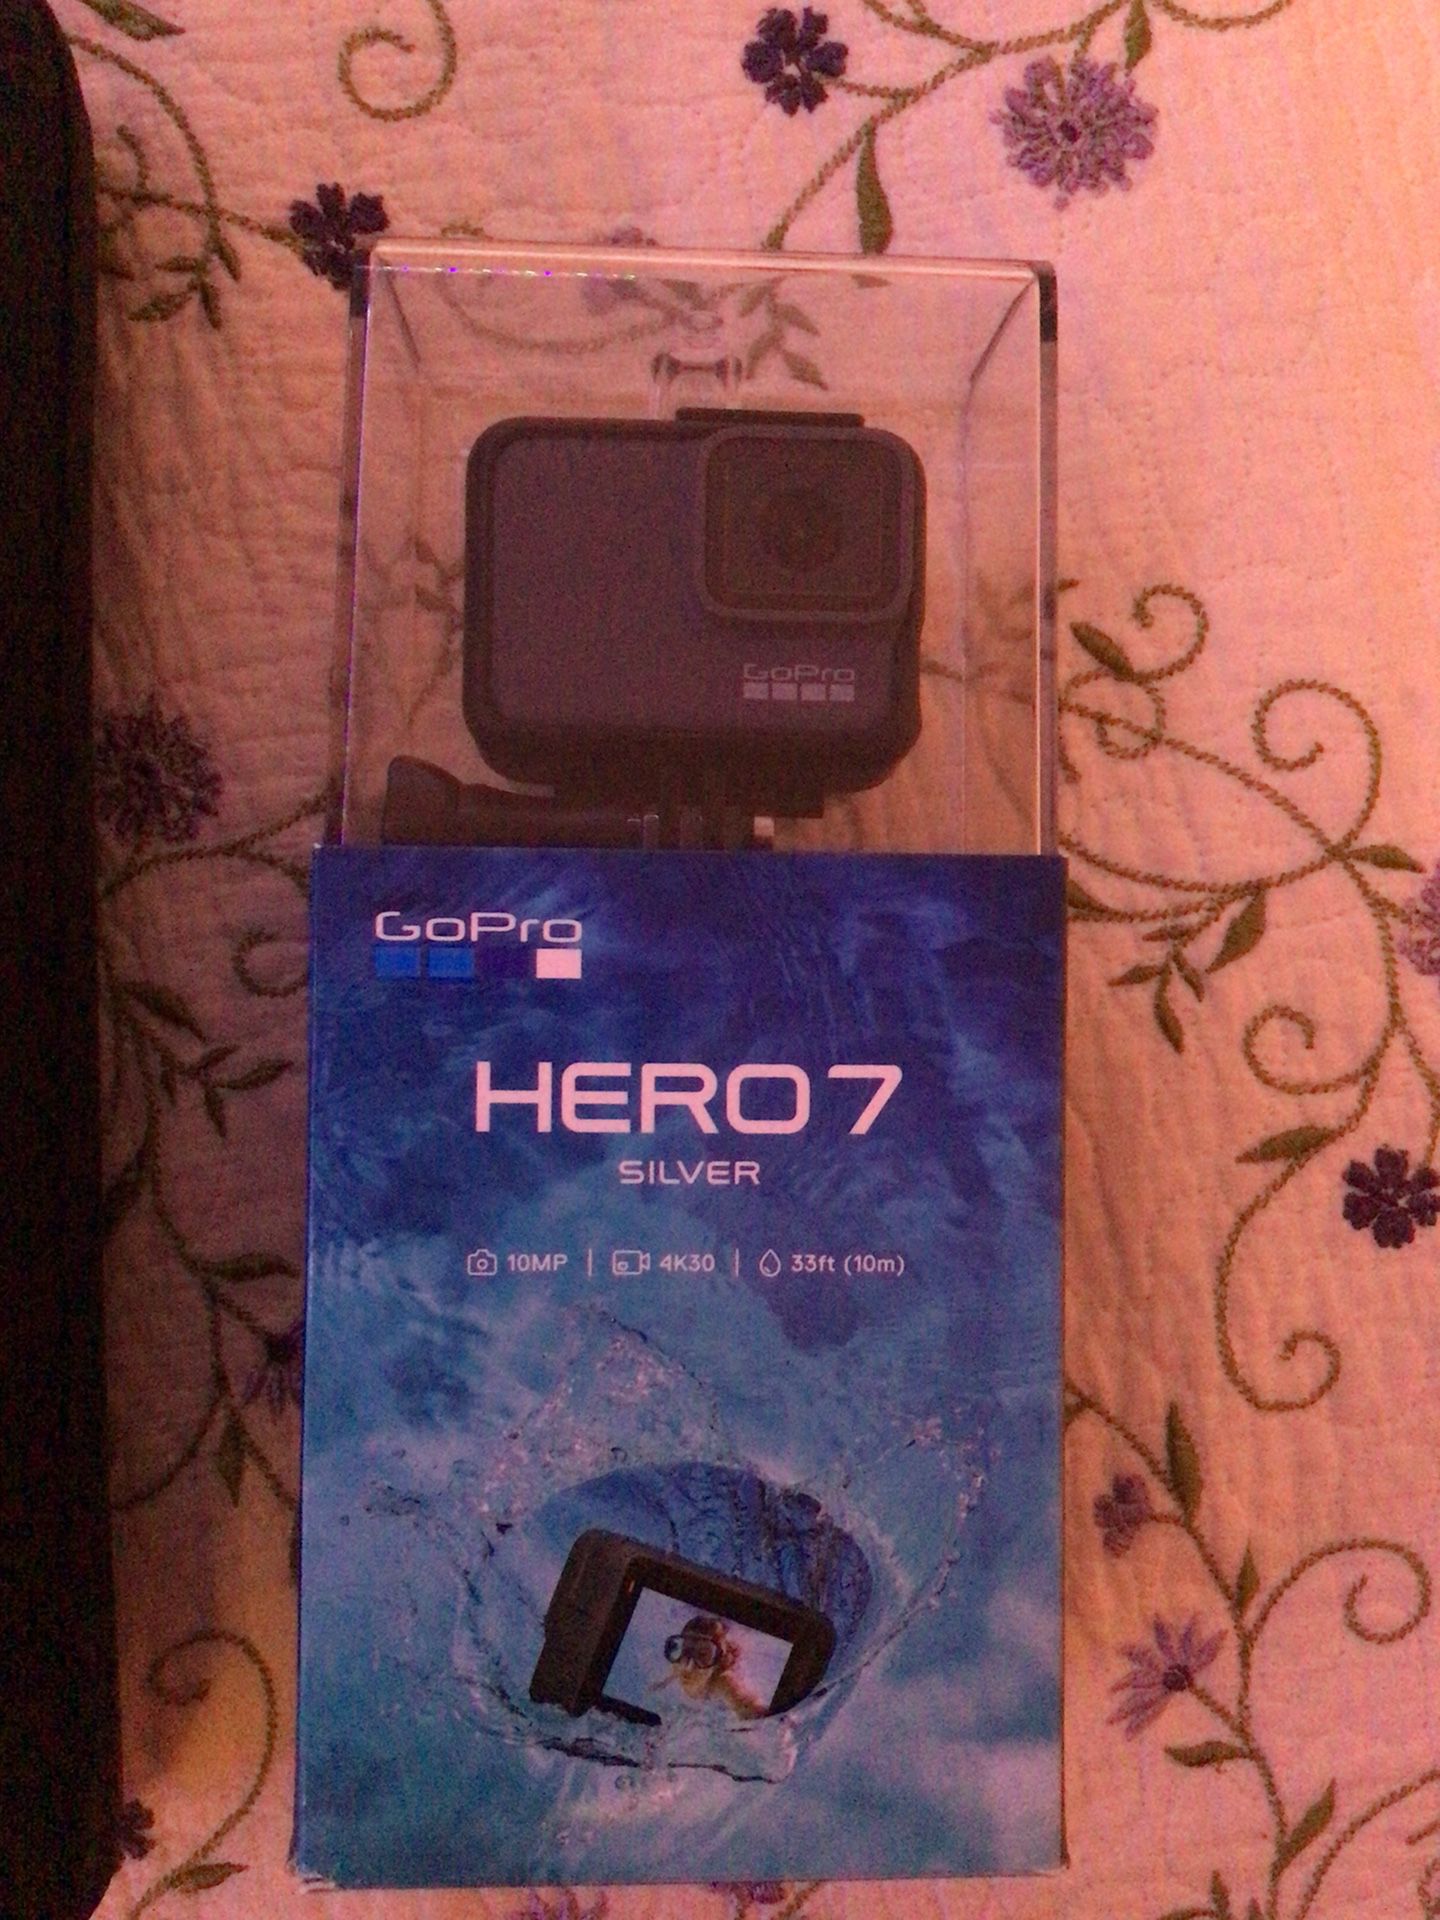 GoPro HERO 7 with accessory kit